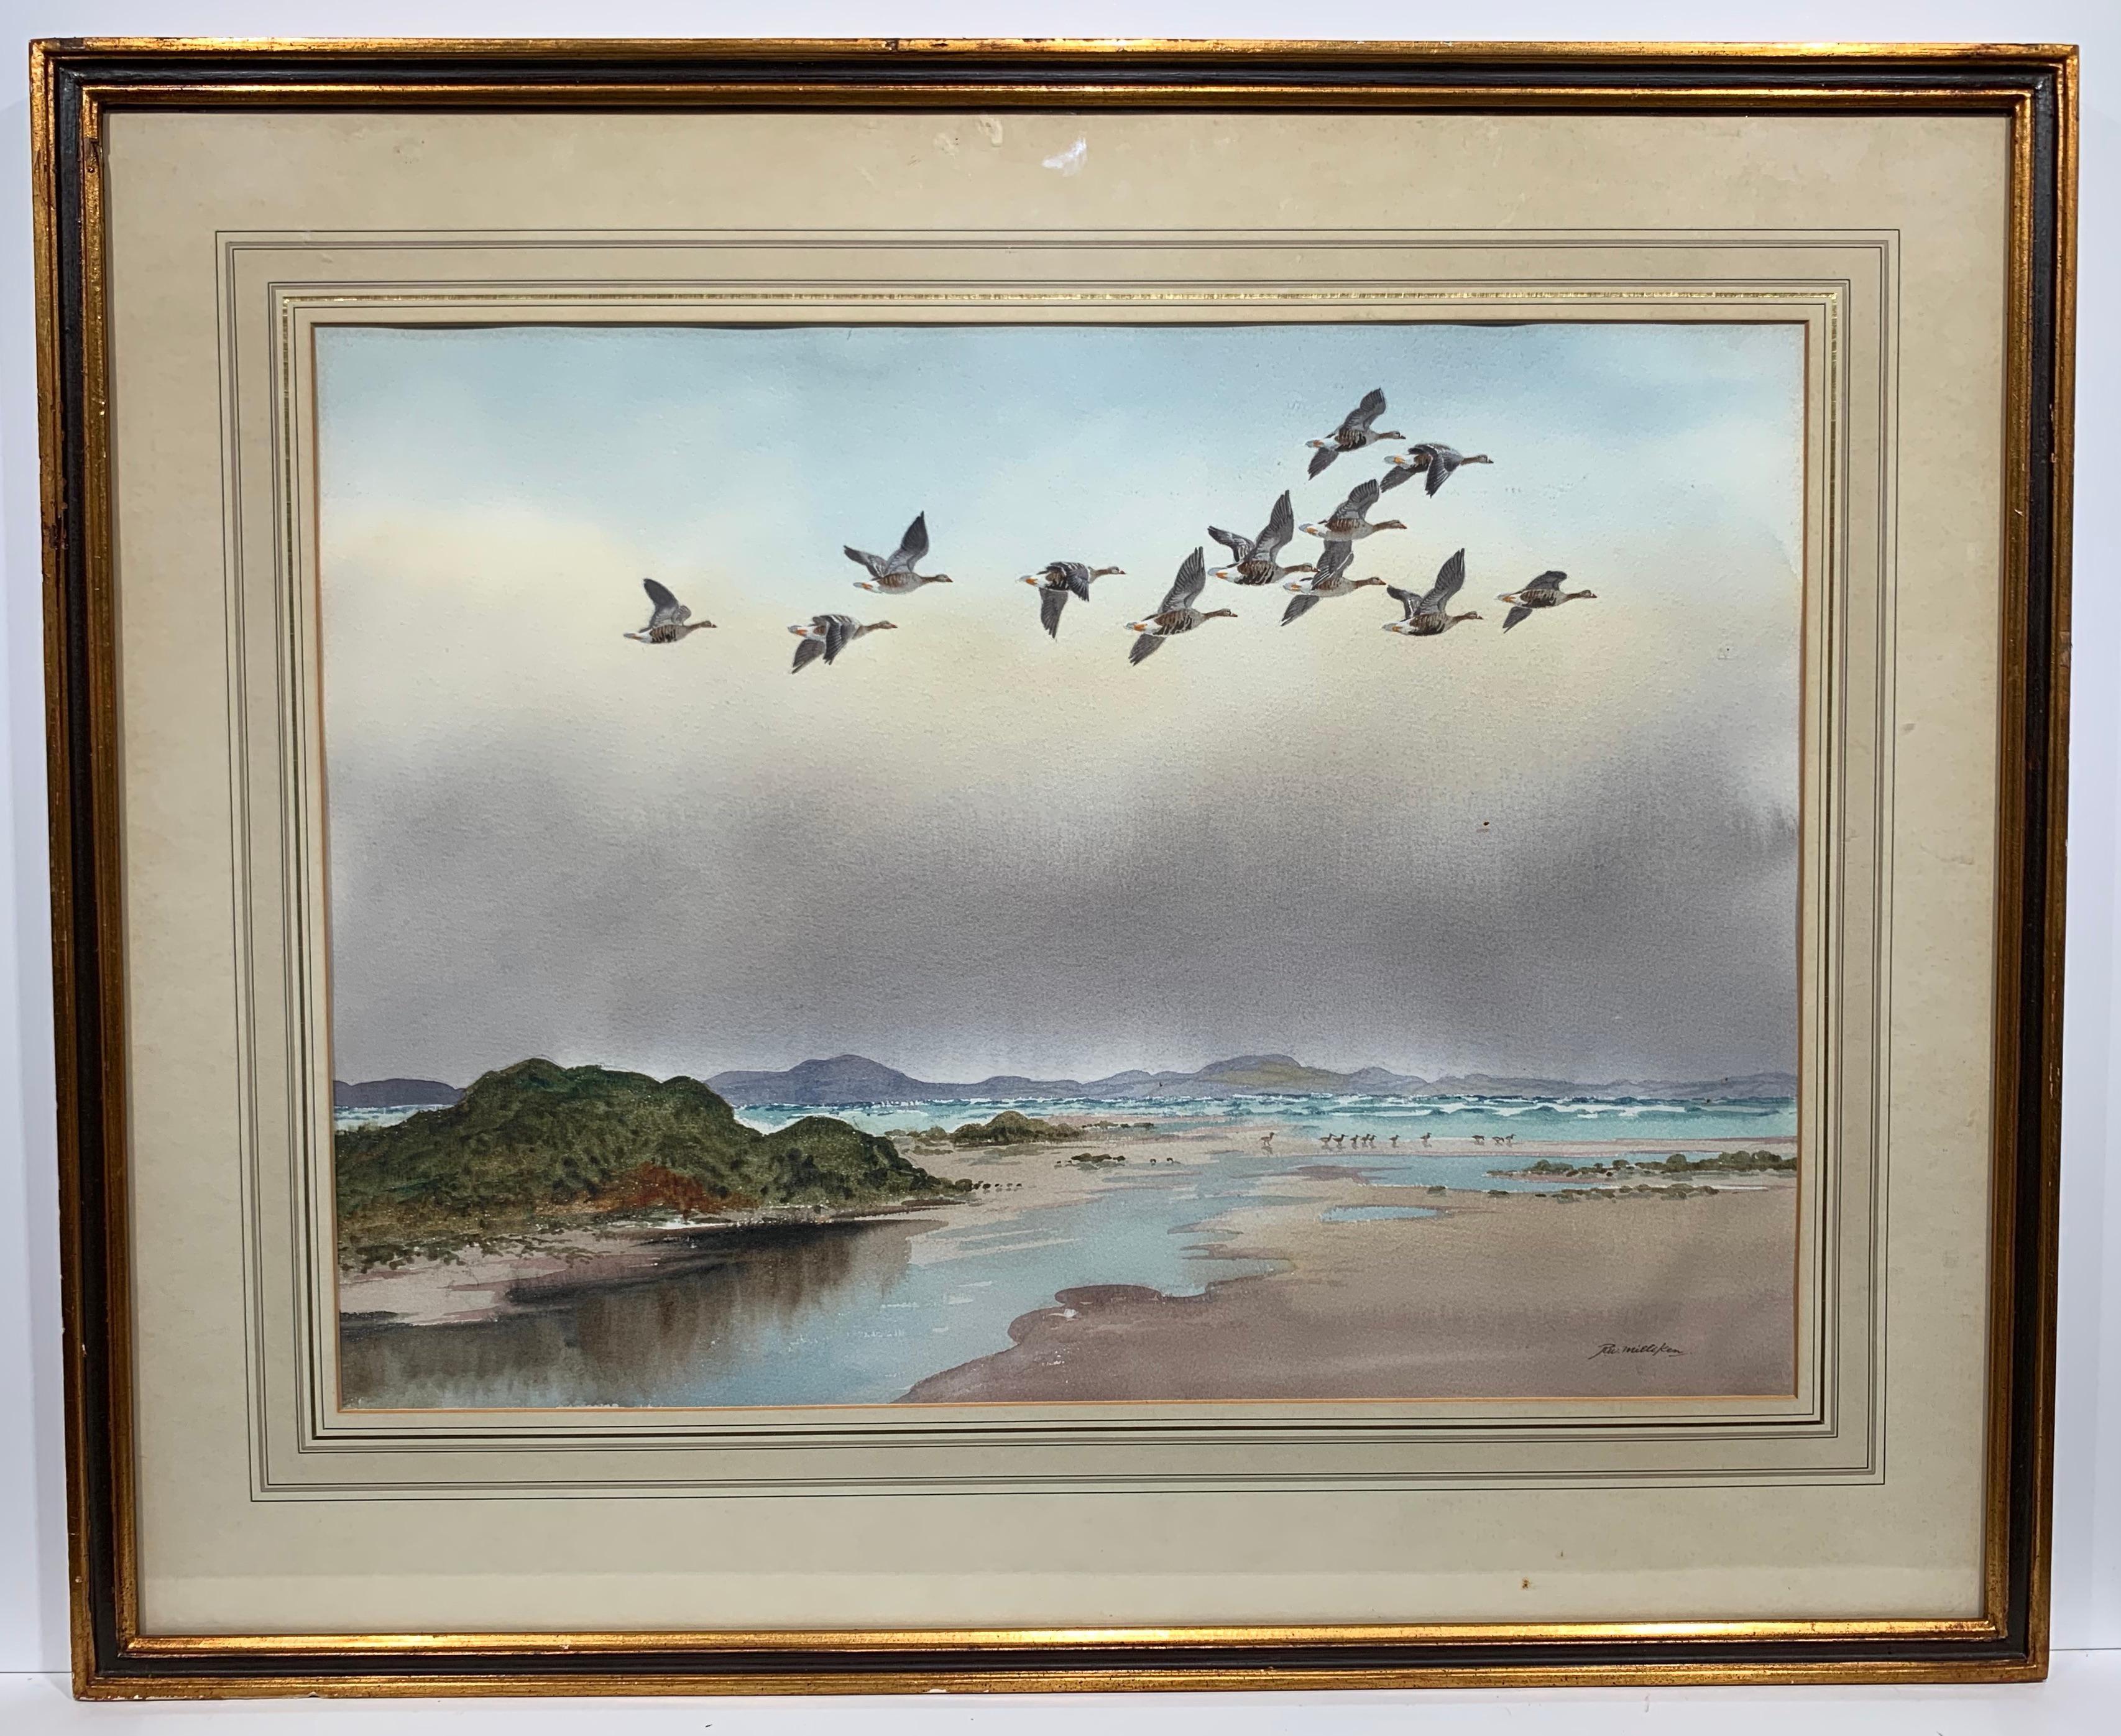 White Fronts Along the Coast (White Fronted Geese, Ireland Landscape)